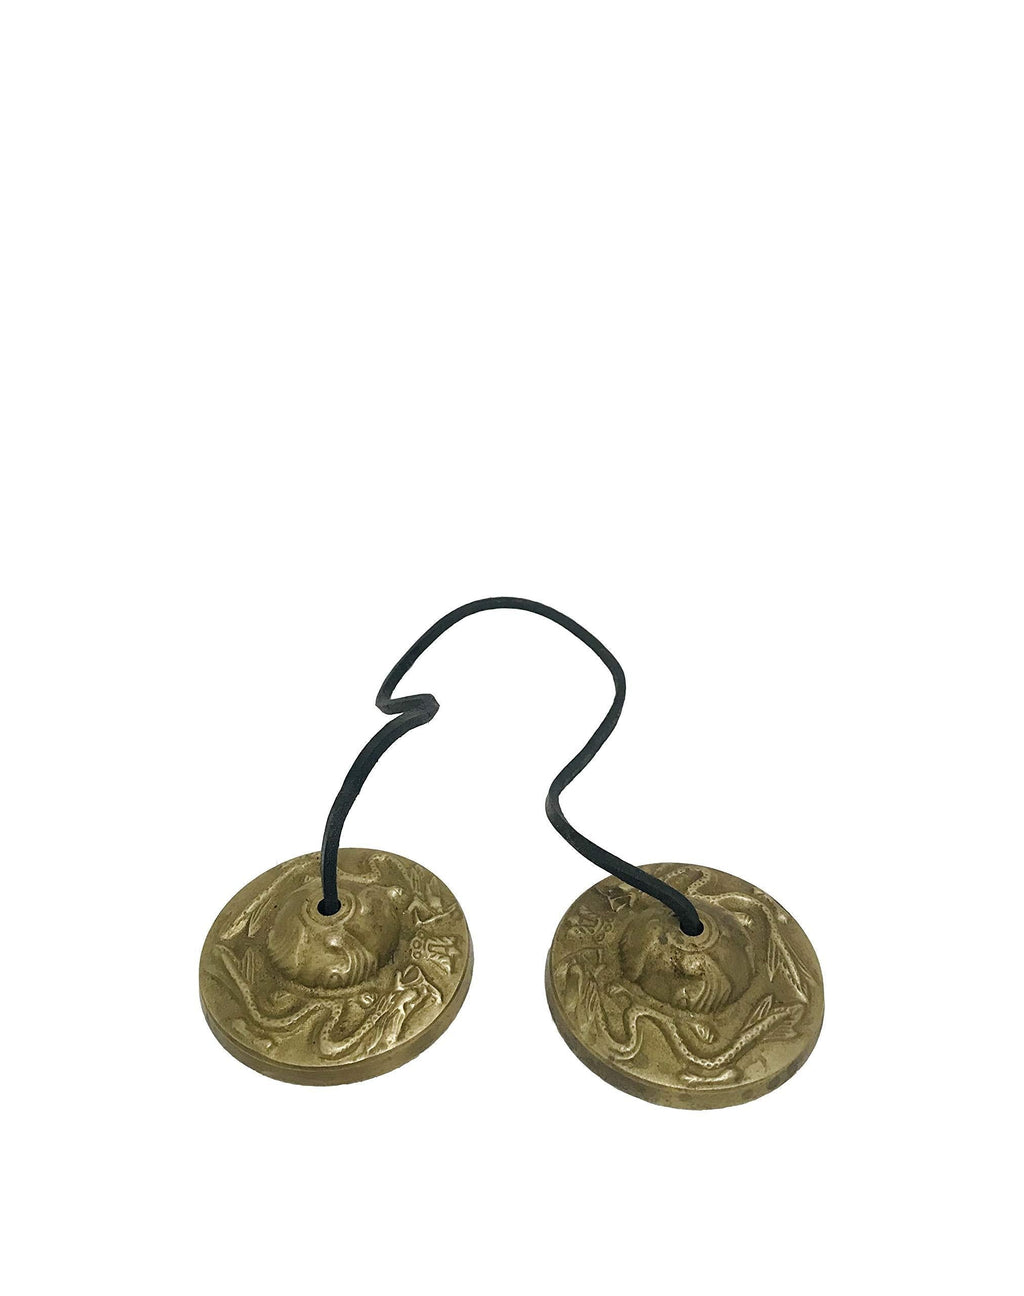 Tibetan Buddhist Tingsha Cymbals on leather cord 2.5 inch Reiki Manjira Bell (Chimes) for Meditation,yoga,healing, calming and Musical Instrument, Dragon Lucky Symbols Embossed